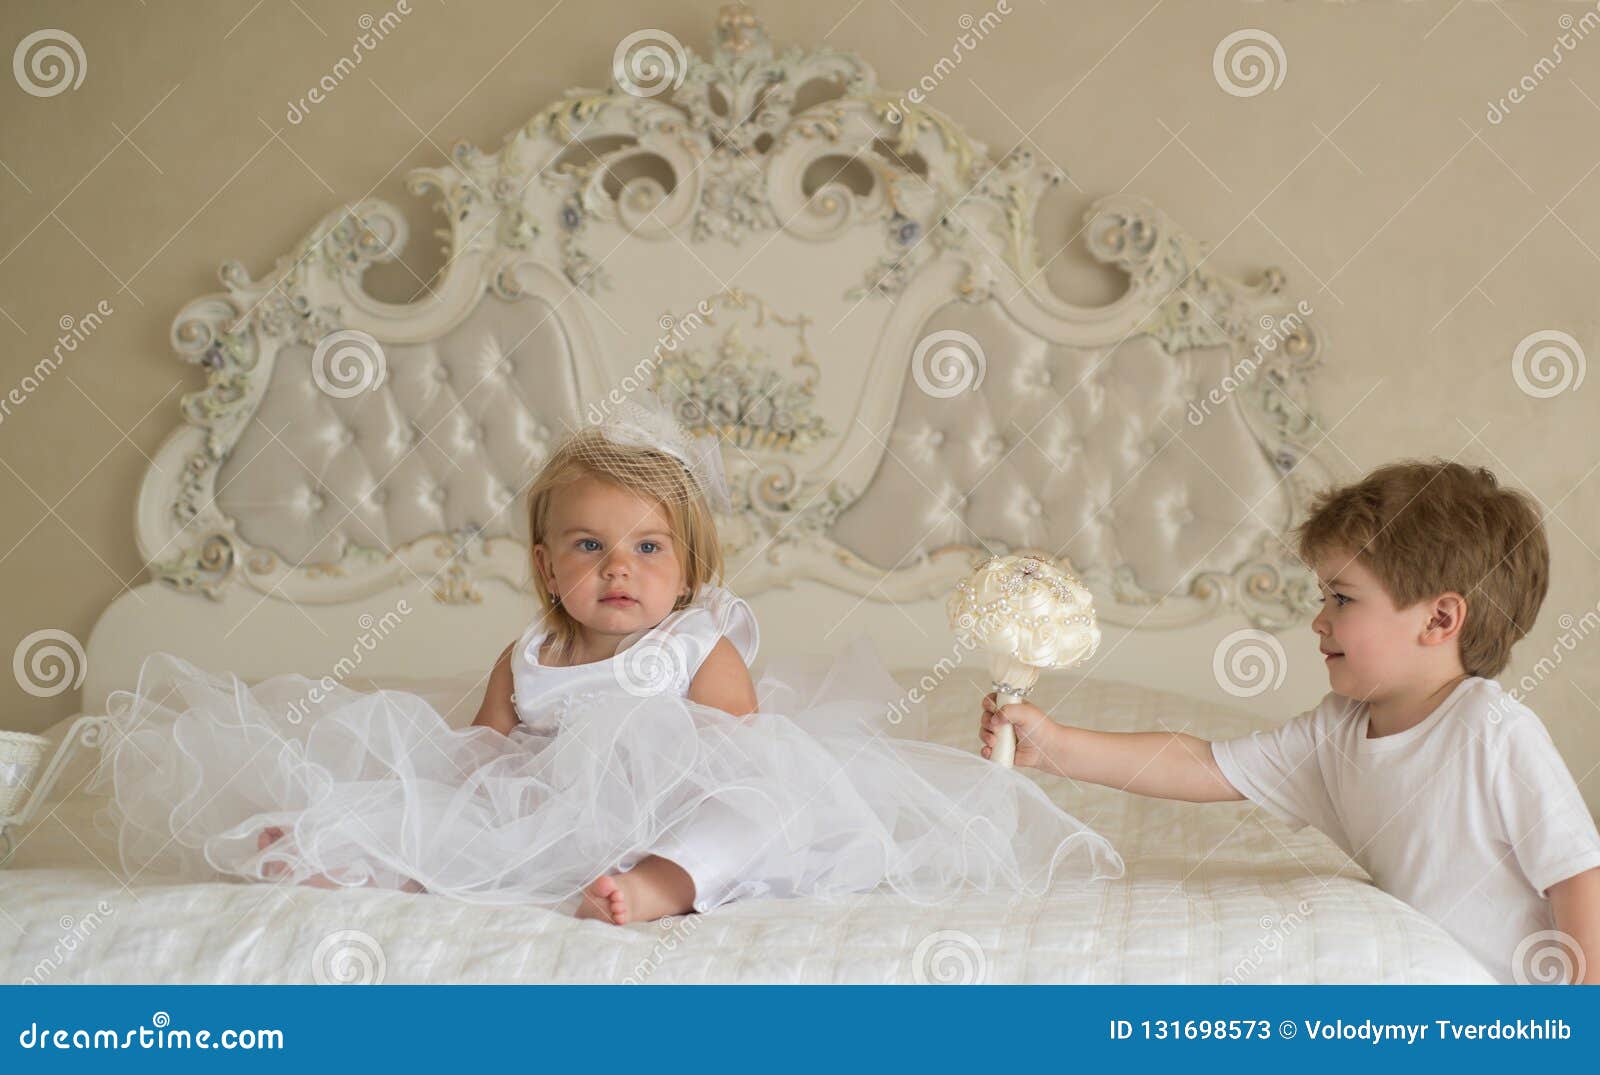 We Have Good Hair. Children Development. Page Boy with Blonde Hairstyle  Hold Wedding Bunch Stock Image - Image of beautiful, sister: 131698573